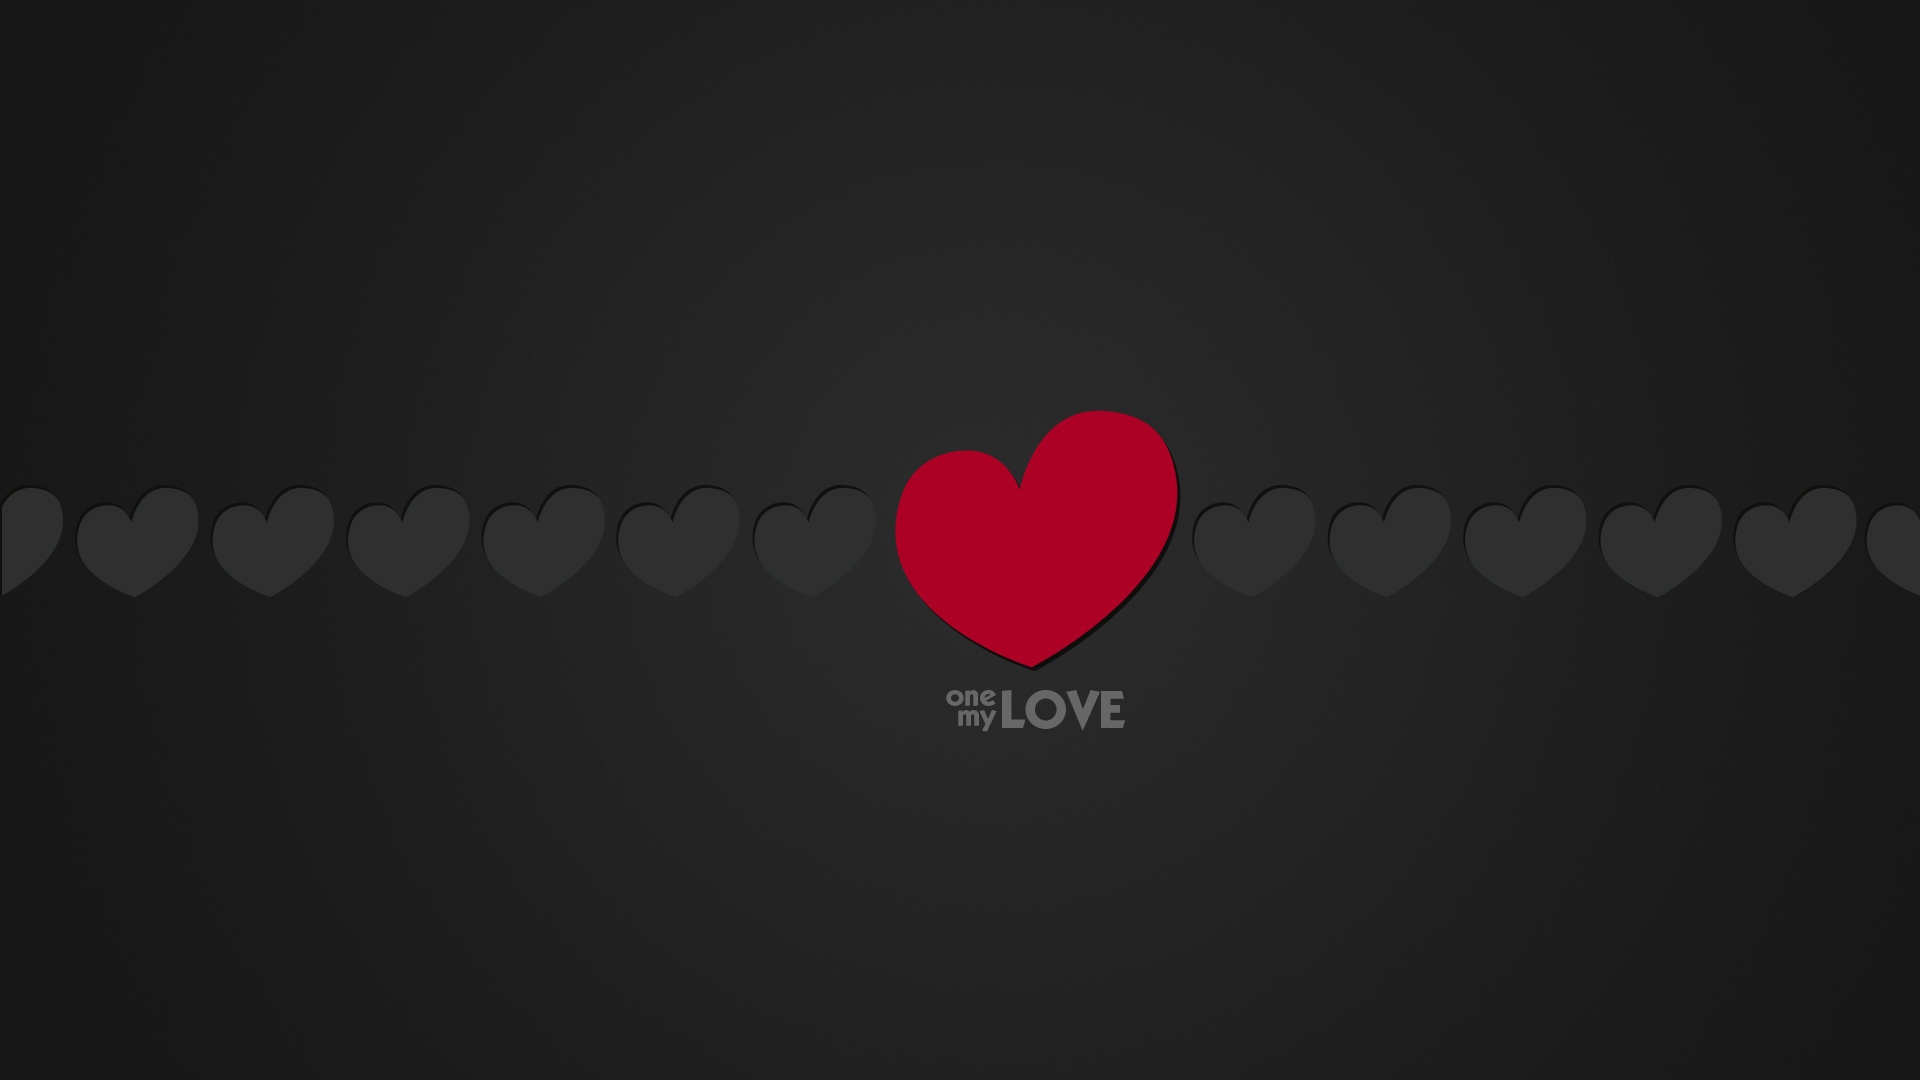 One My Love Wallpapers   1920x1080   106386 1920x1080